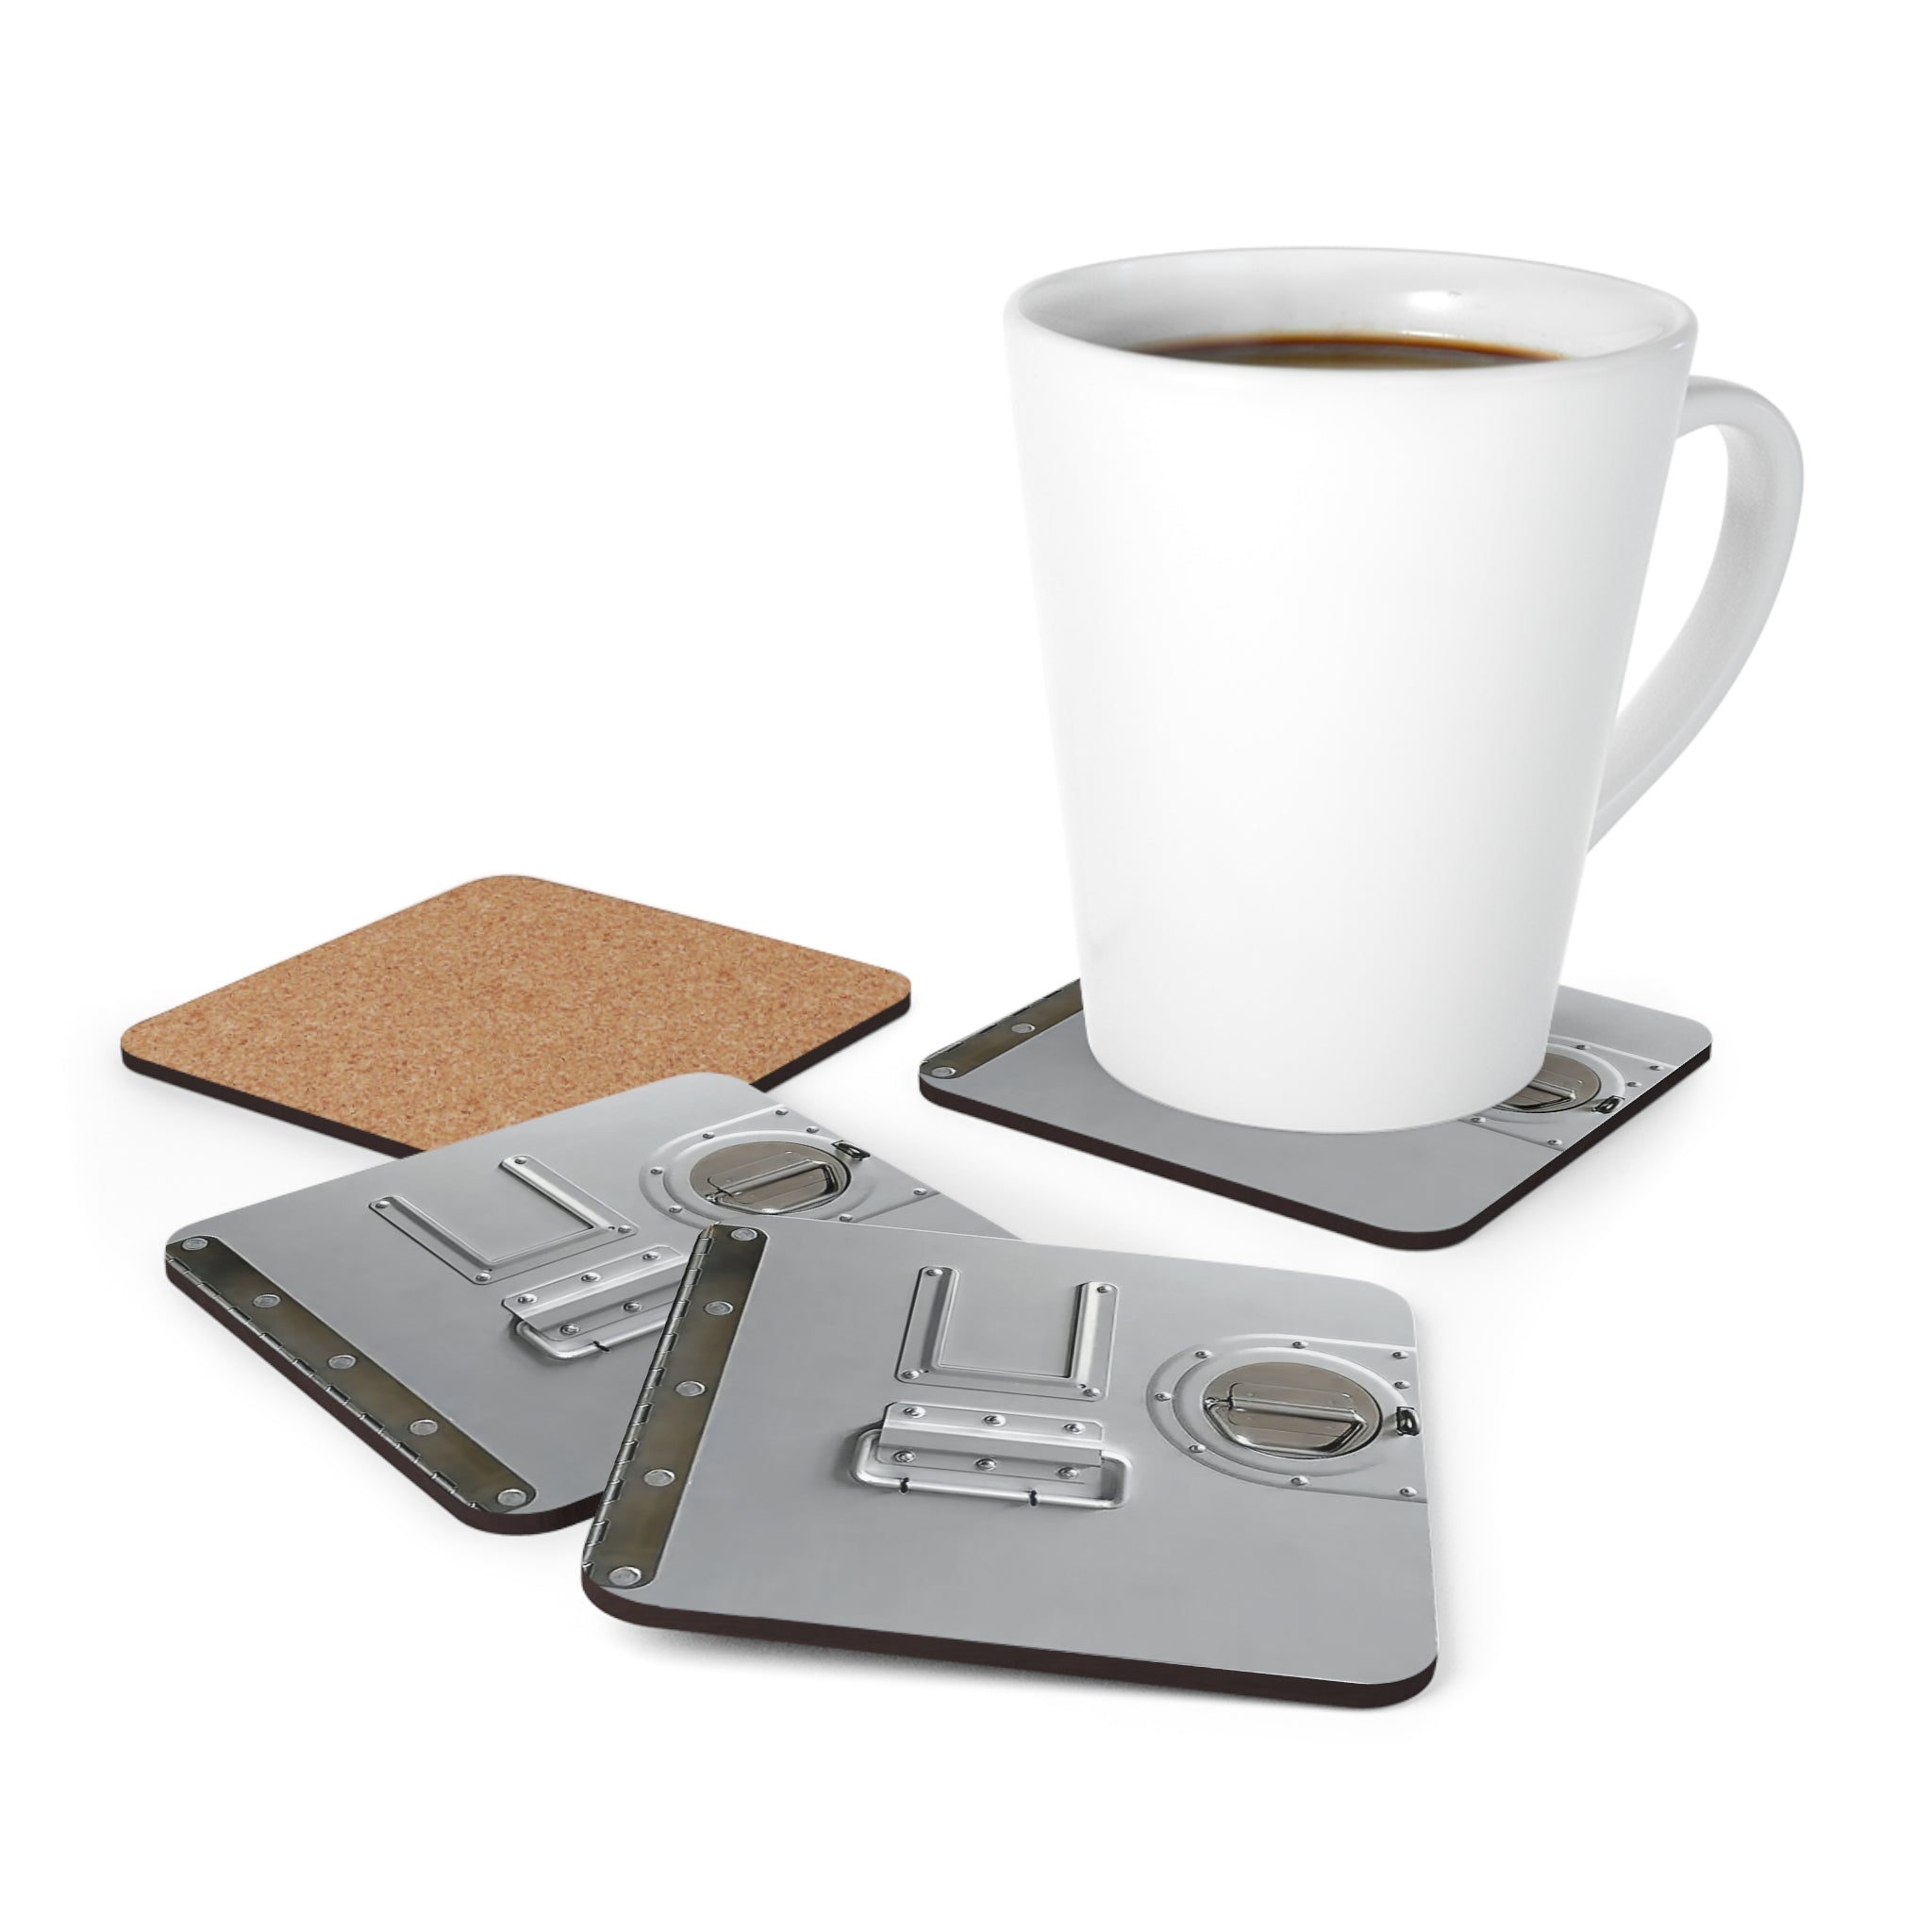 Galley Container Style Corkwood Coaster Set - I Love a Hangar